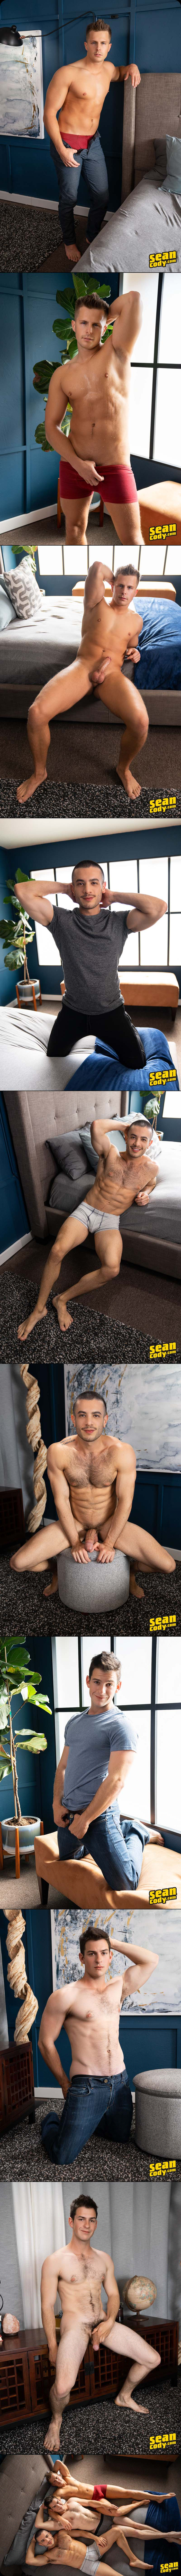 Nixon Returns For His First Threeway DP'ing Manny with Archie (Bareback) at SeanCody